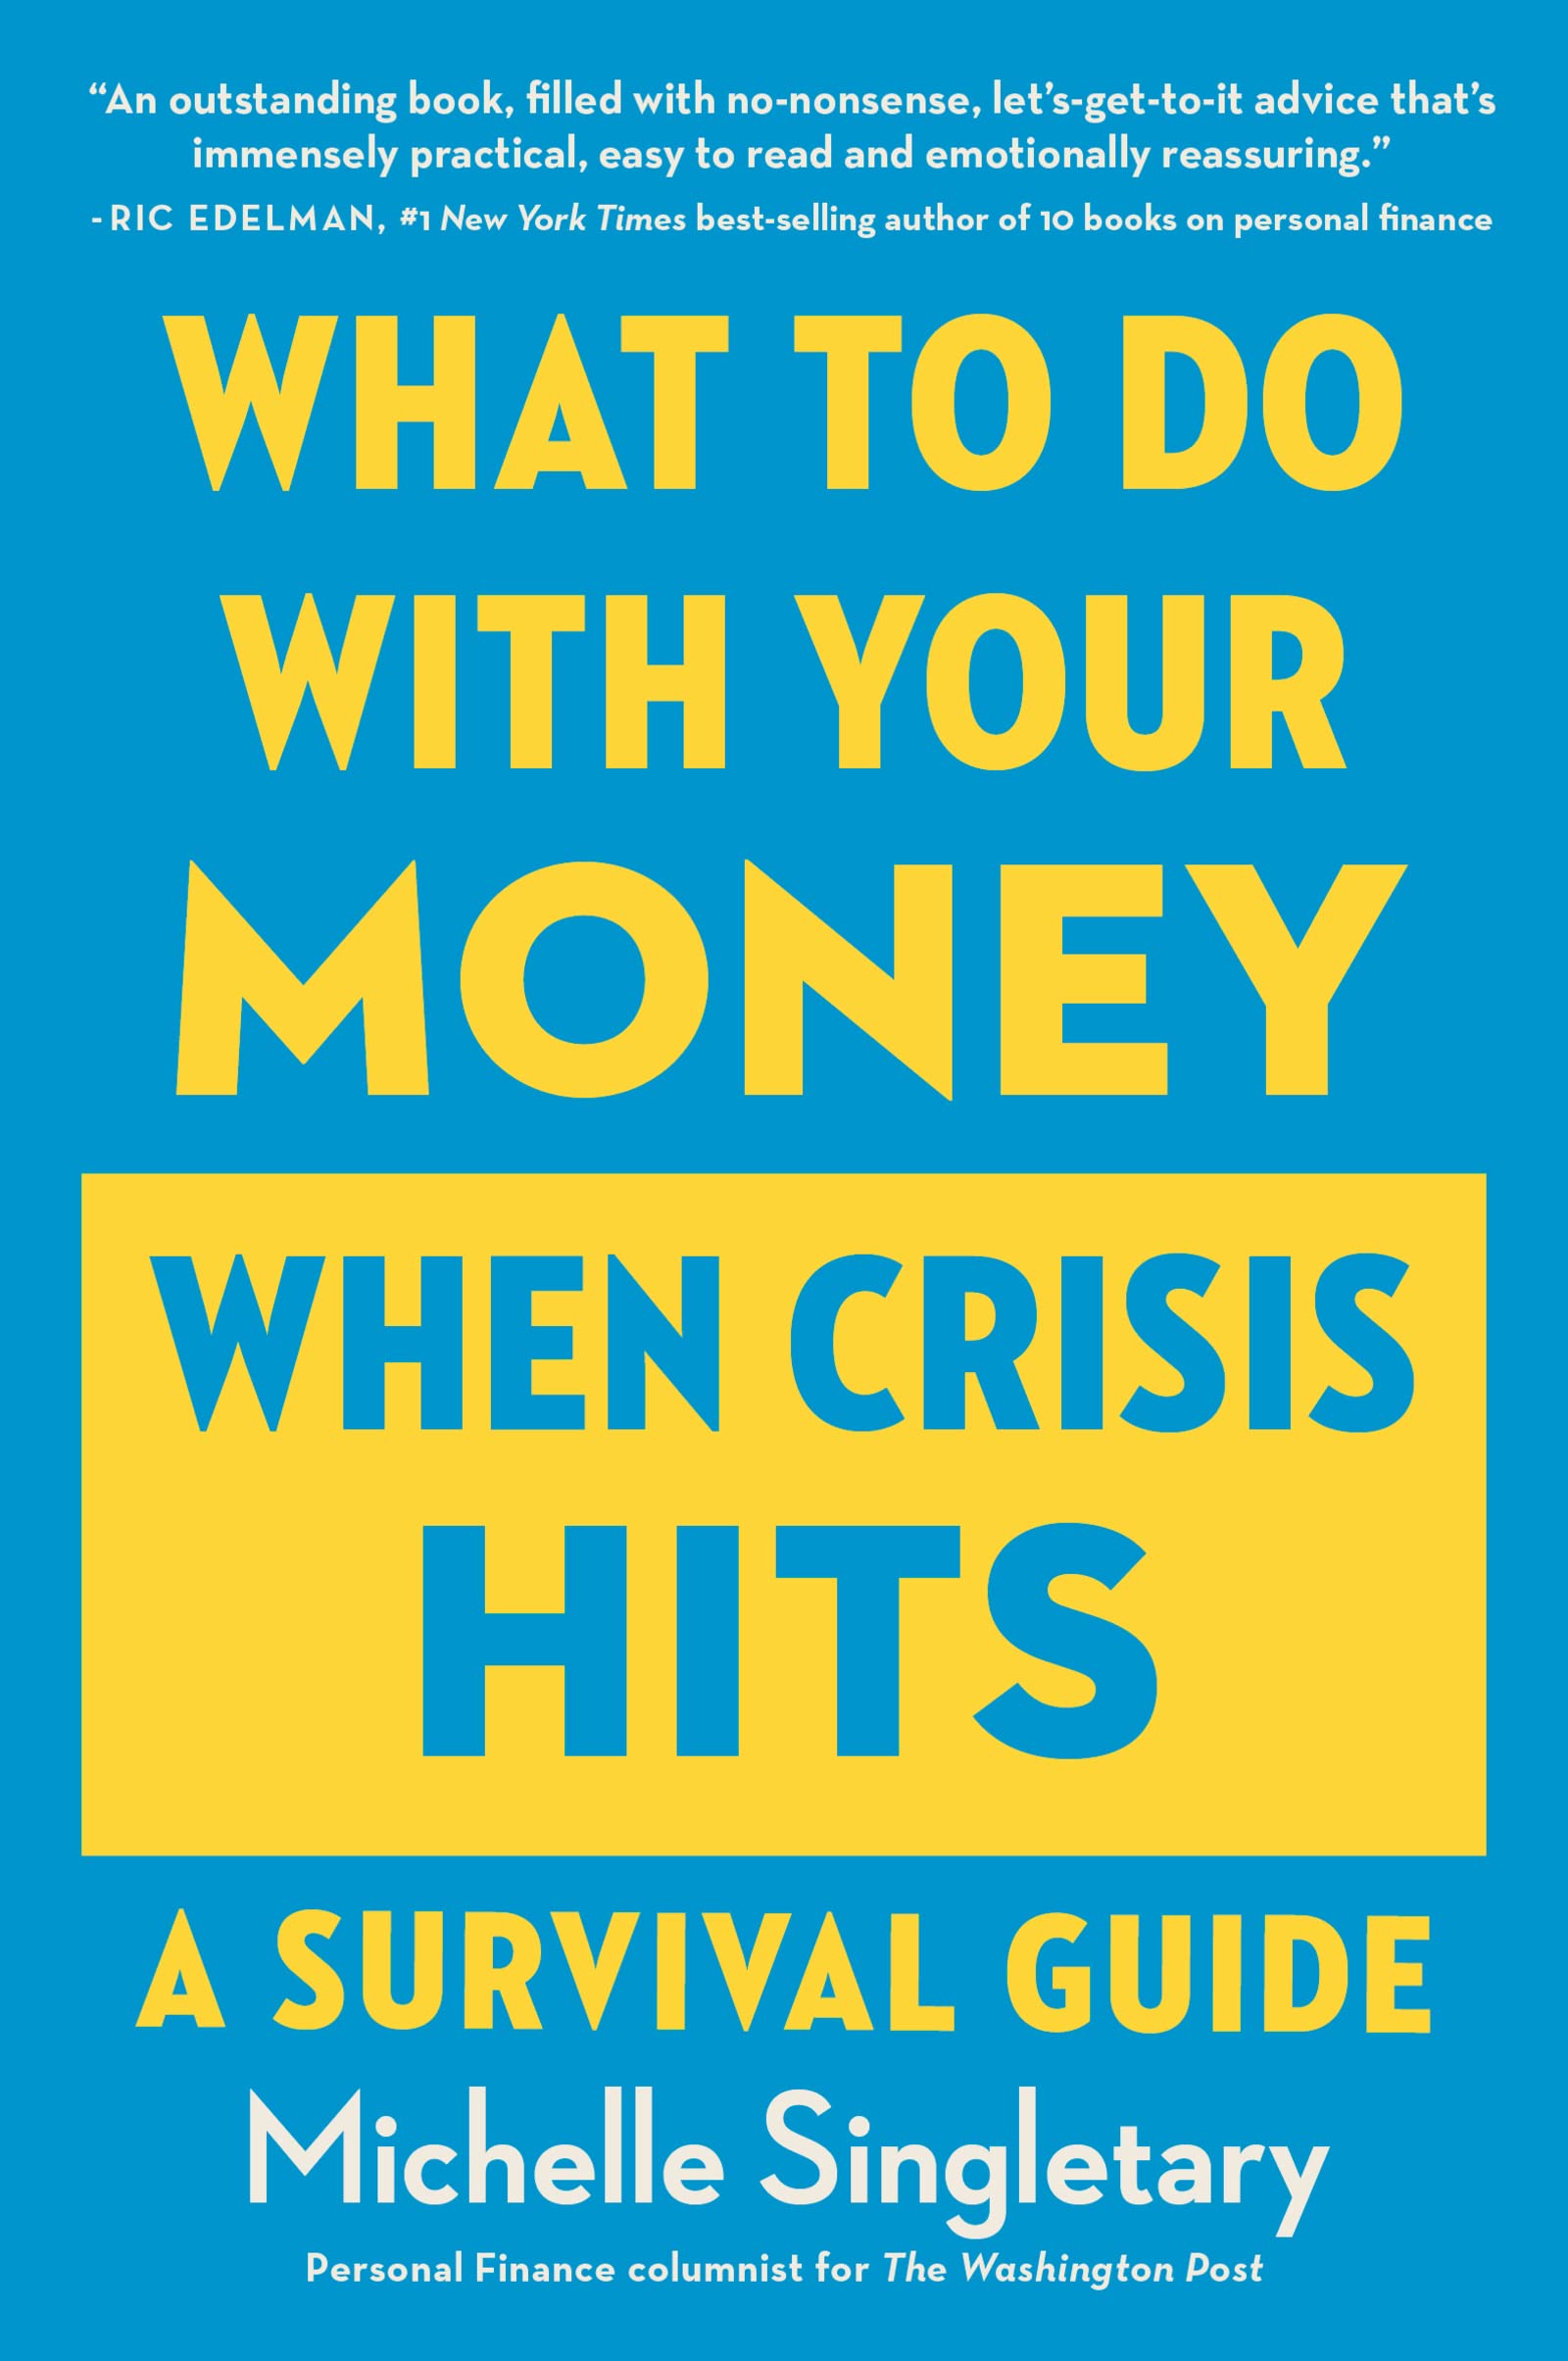 What to Do with Your Money When Crisis Hits: A Survival Guide - SureShot Books Publishing LLC